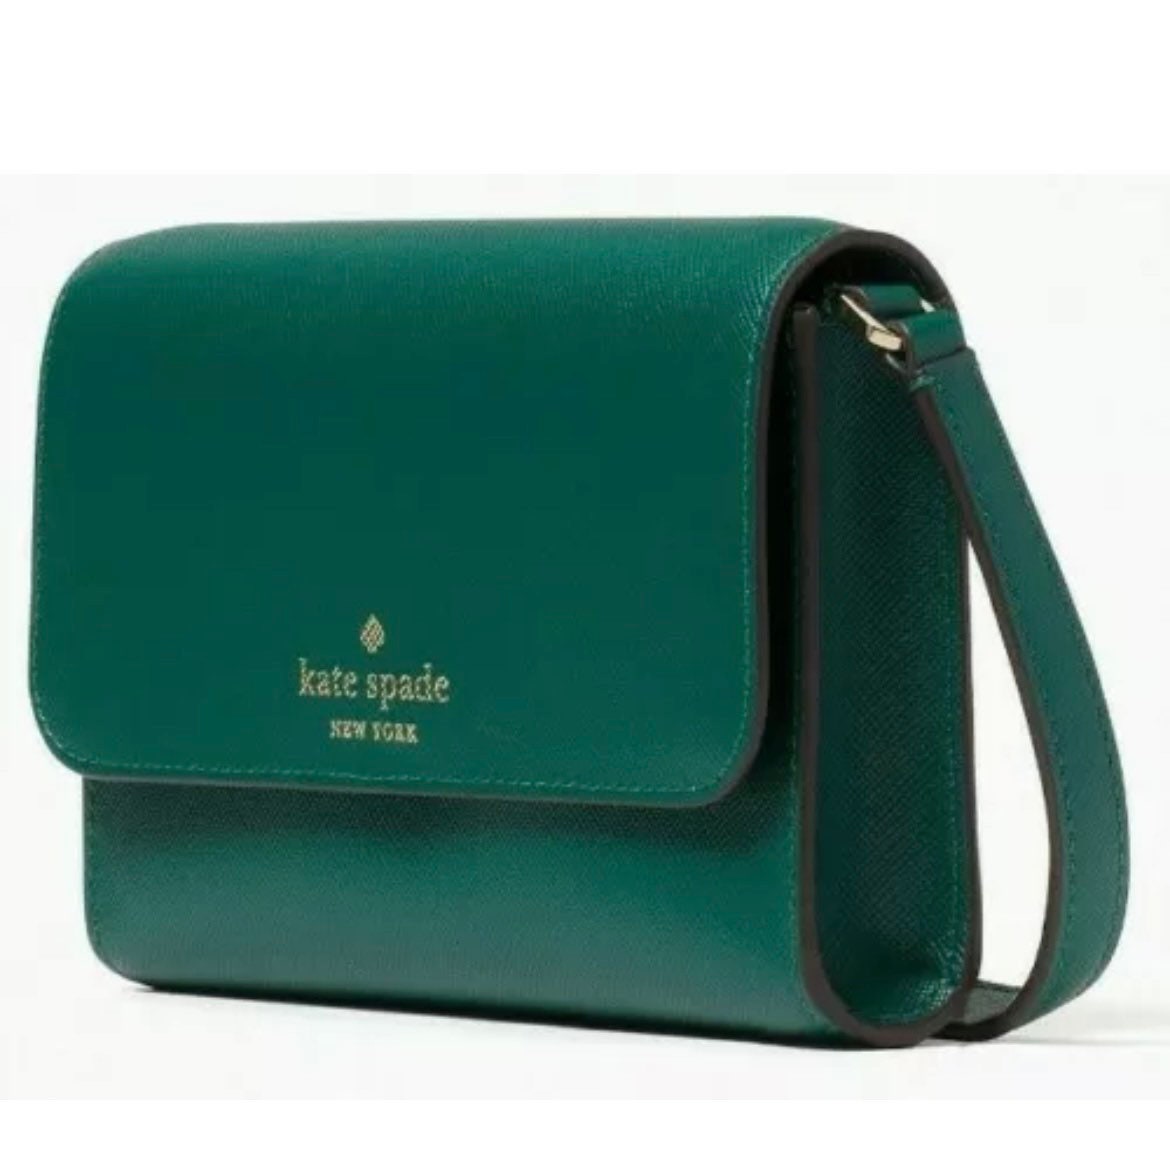  Kate Spade NY Daily Tote Shoulder Bag Saffiano Leather Zip Top  Deep Jade Green : Clothing, Shoes & Jewelry